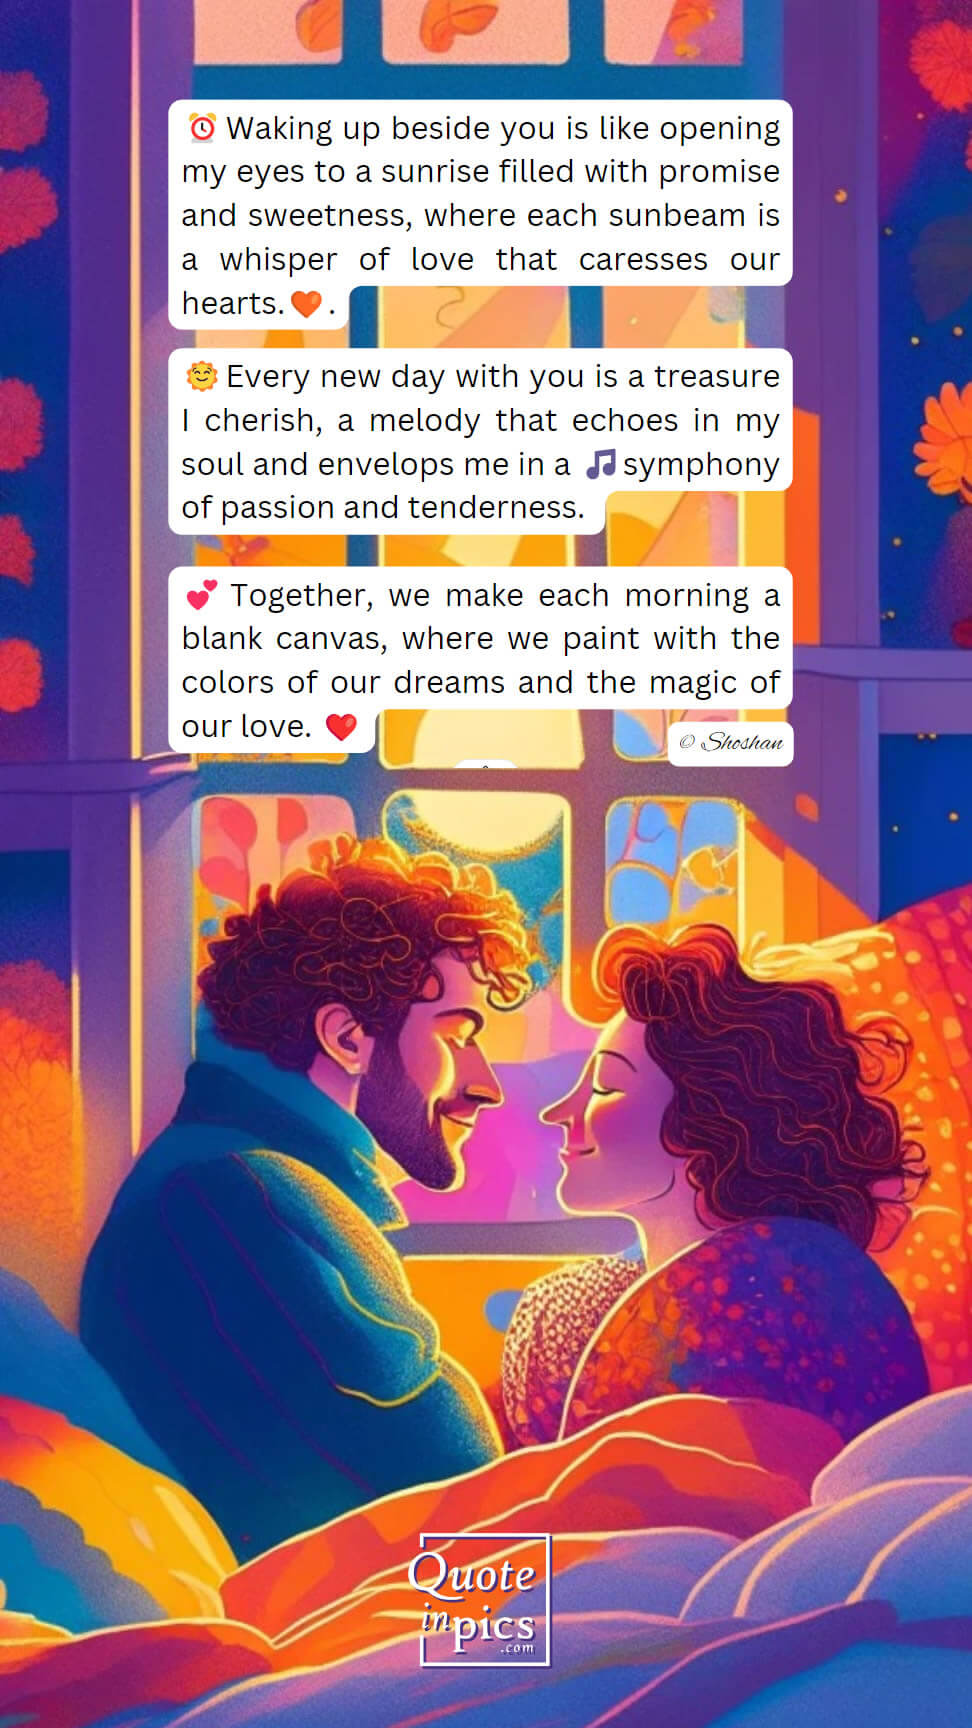 Capturing the essence of love: a quote on waking up beside your soulmate in a heartwarming image